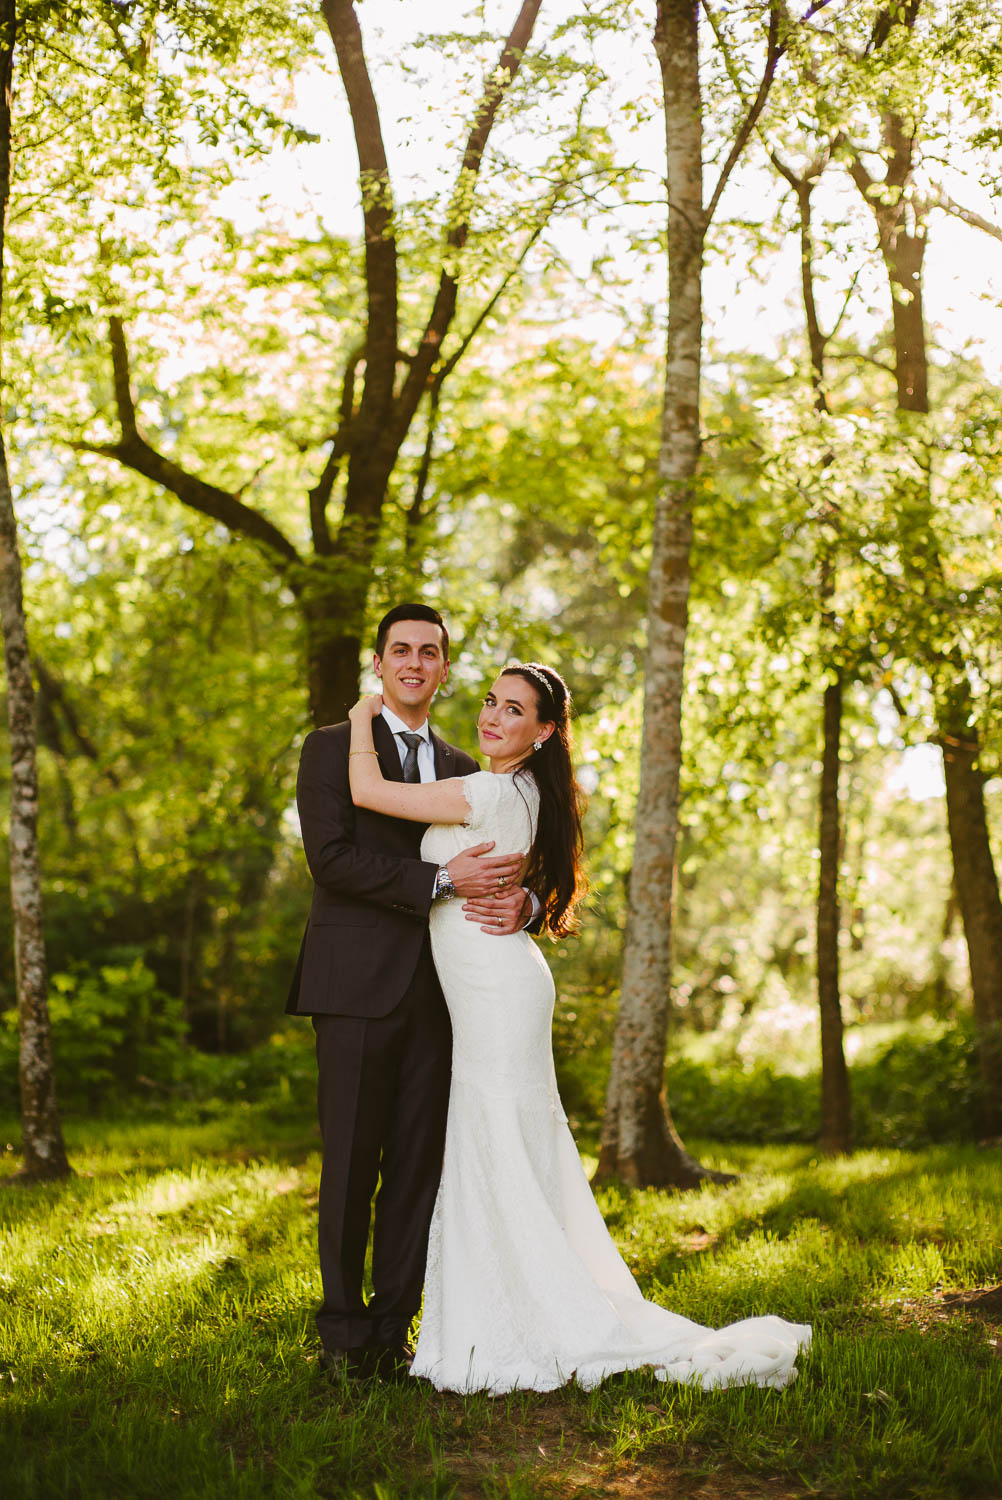 Couple after wedding ceremony pose in the woods at Pecan Springs Houston Texas photo by Philip Thomas Photography